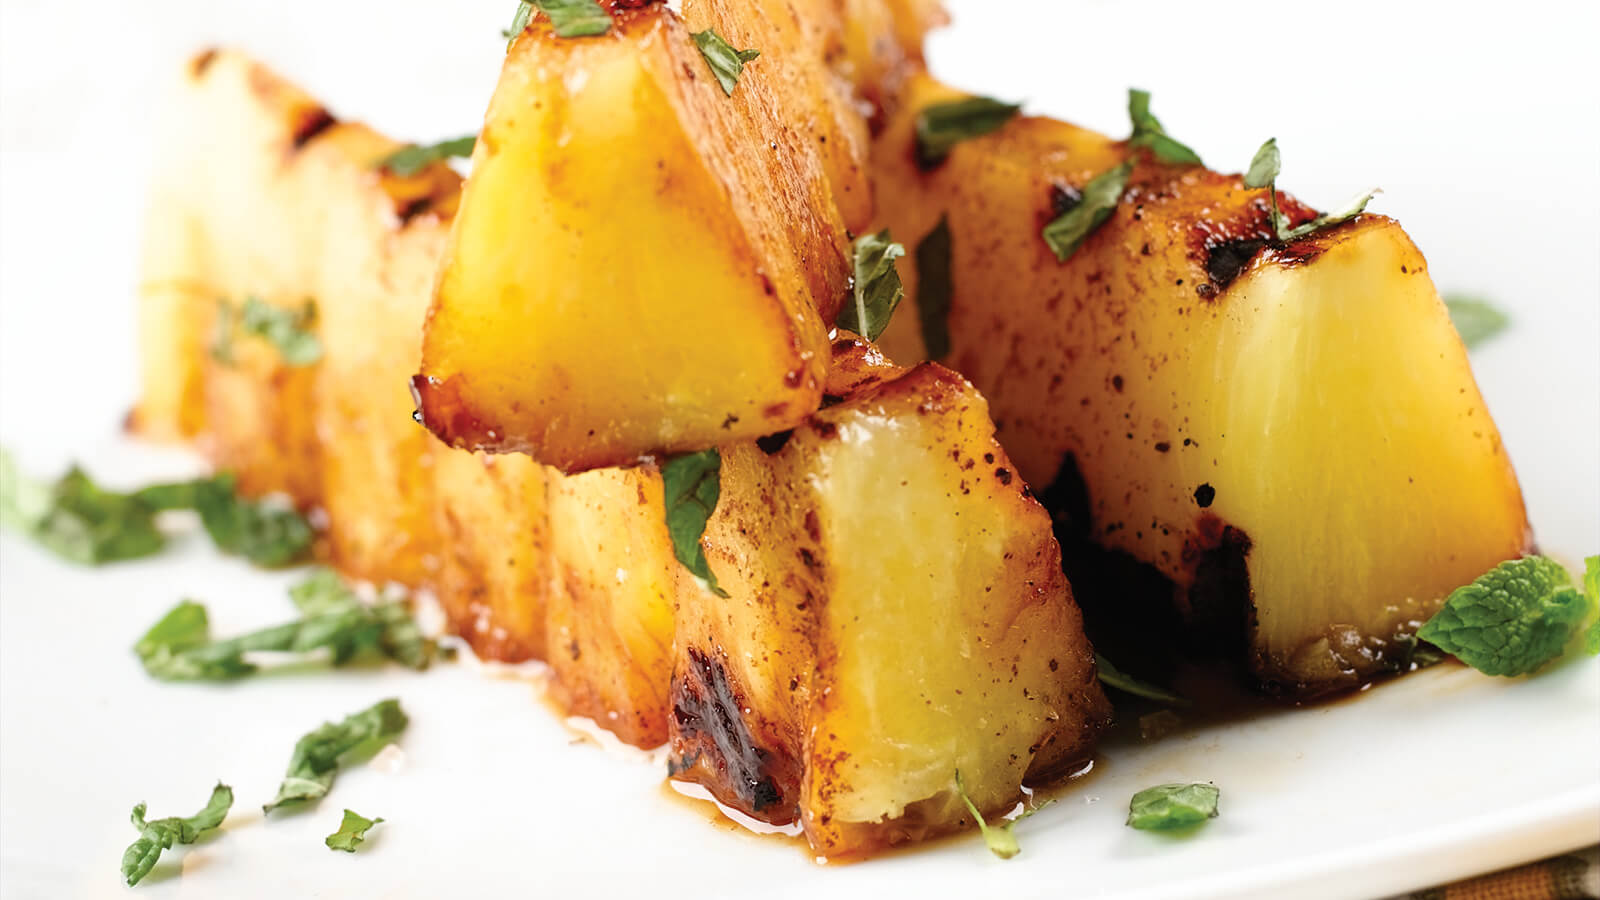 Grilled Pineapple with Chili Lime Rub